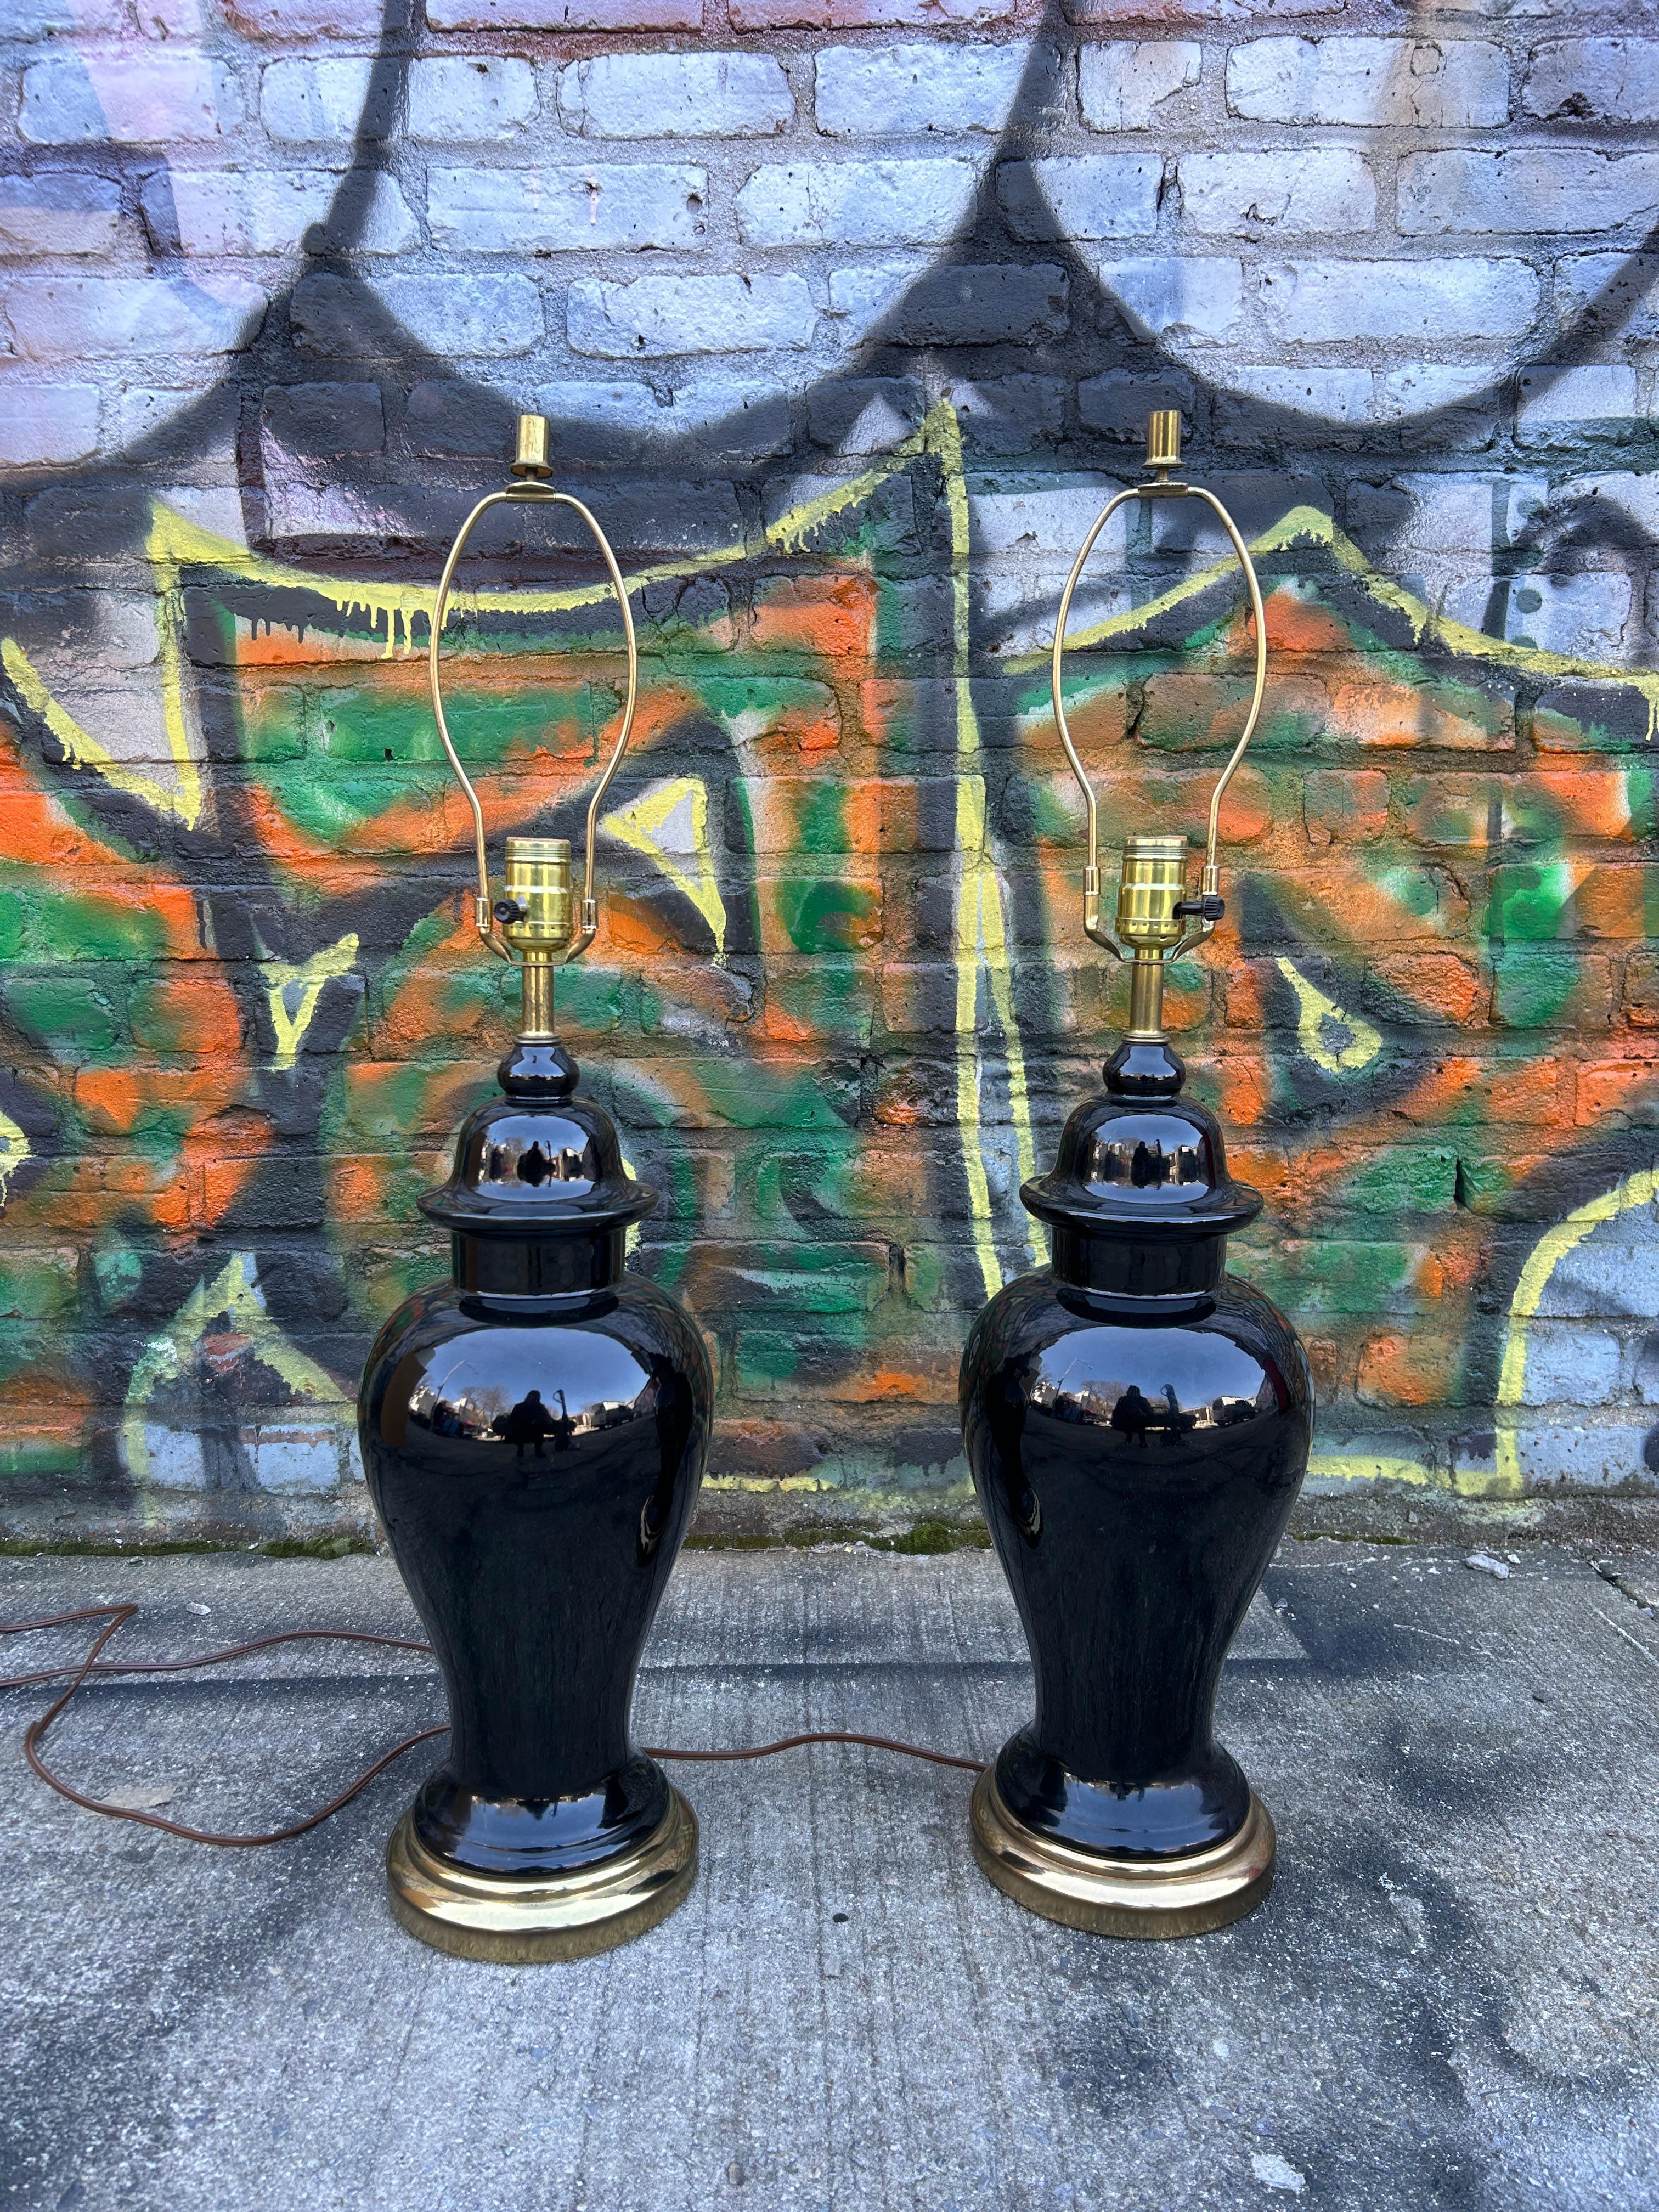 Mid-Century Modern pair of Hollywood Regency ceramic black and gold table lamps with shades. 120v American Plug - Lamps function 100% takes normal Edison Light bulbs. Located in Brooklyn NYC.